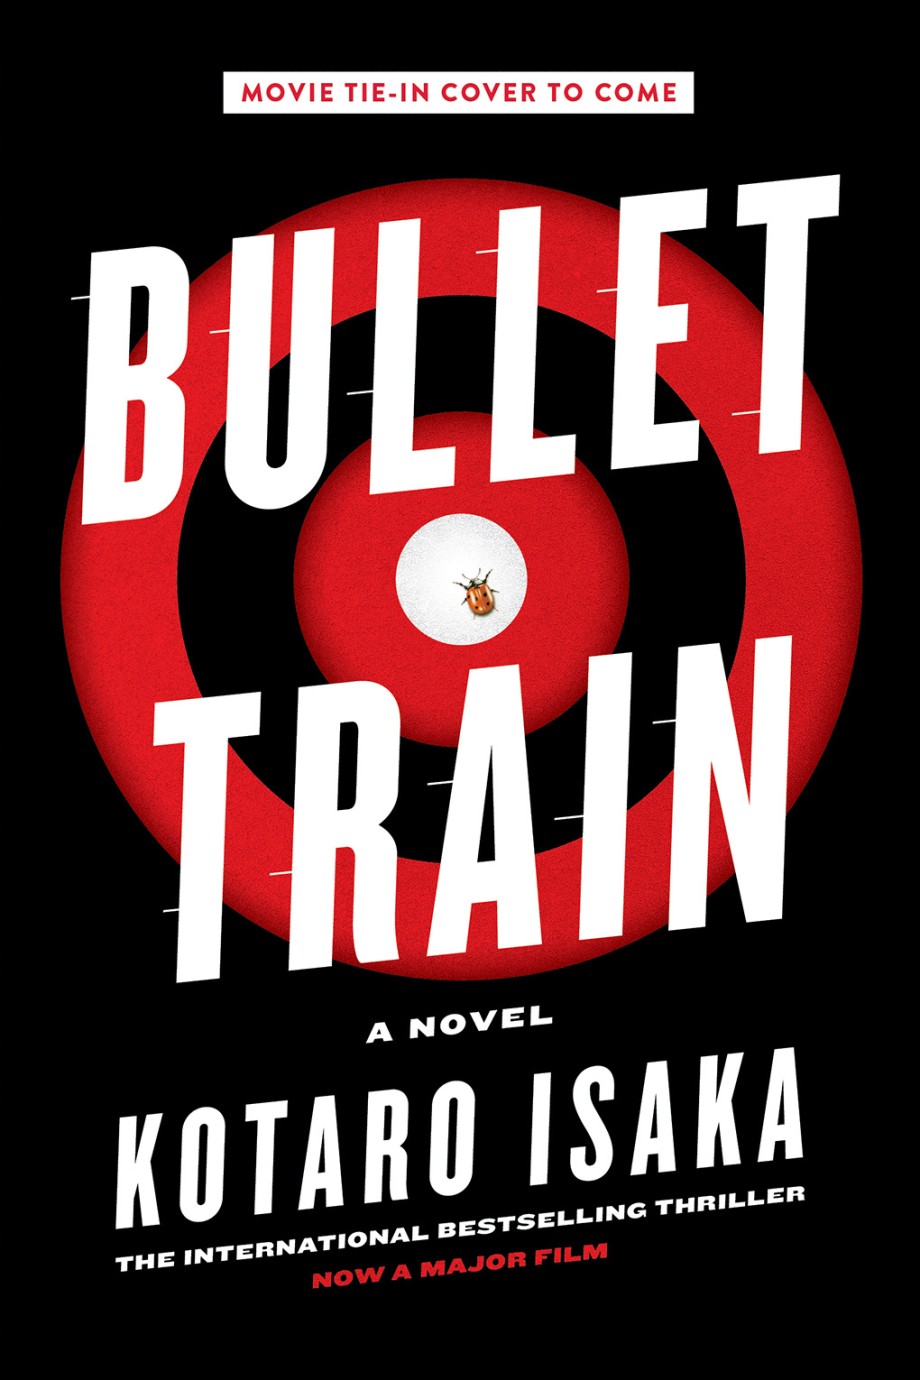 Bullet Train (Movie Tie-In Edition) A Novel